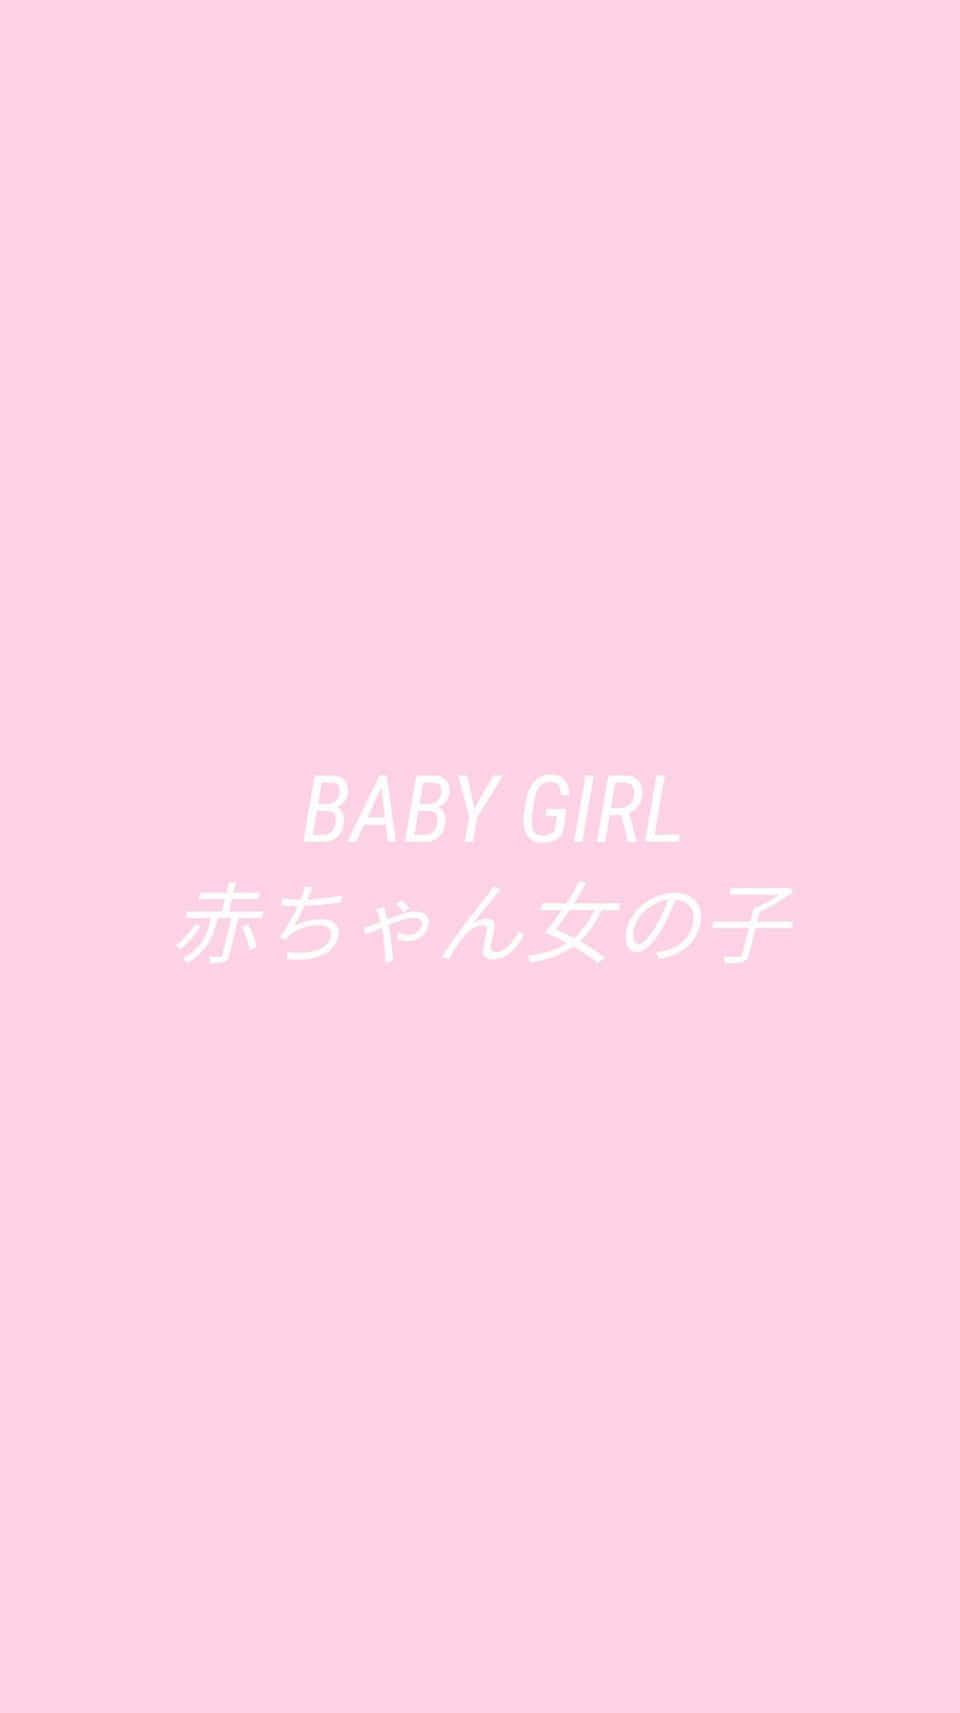 baby girl - a pink background with white writing